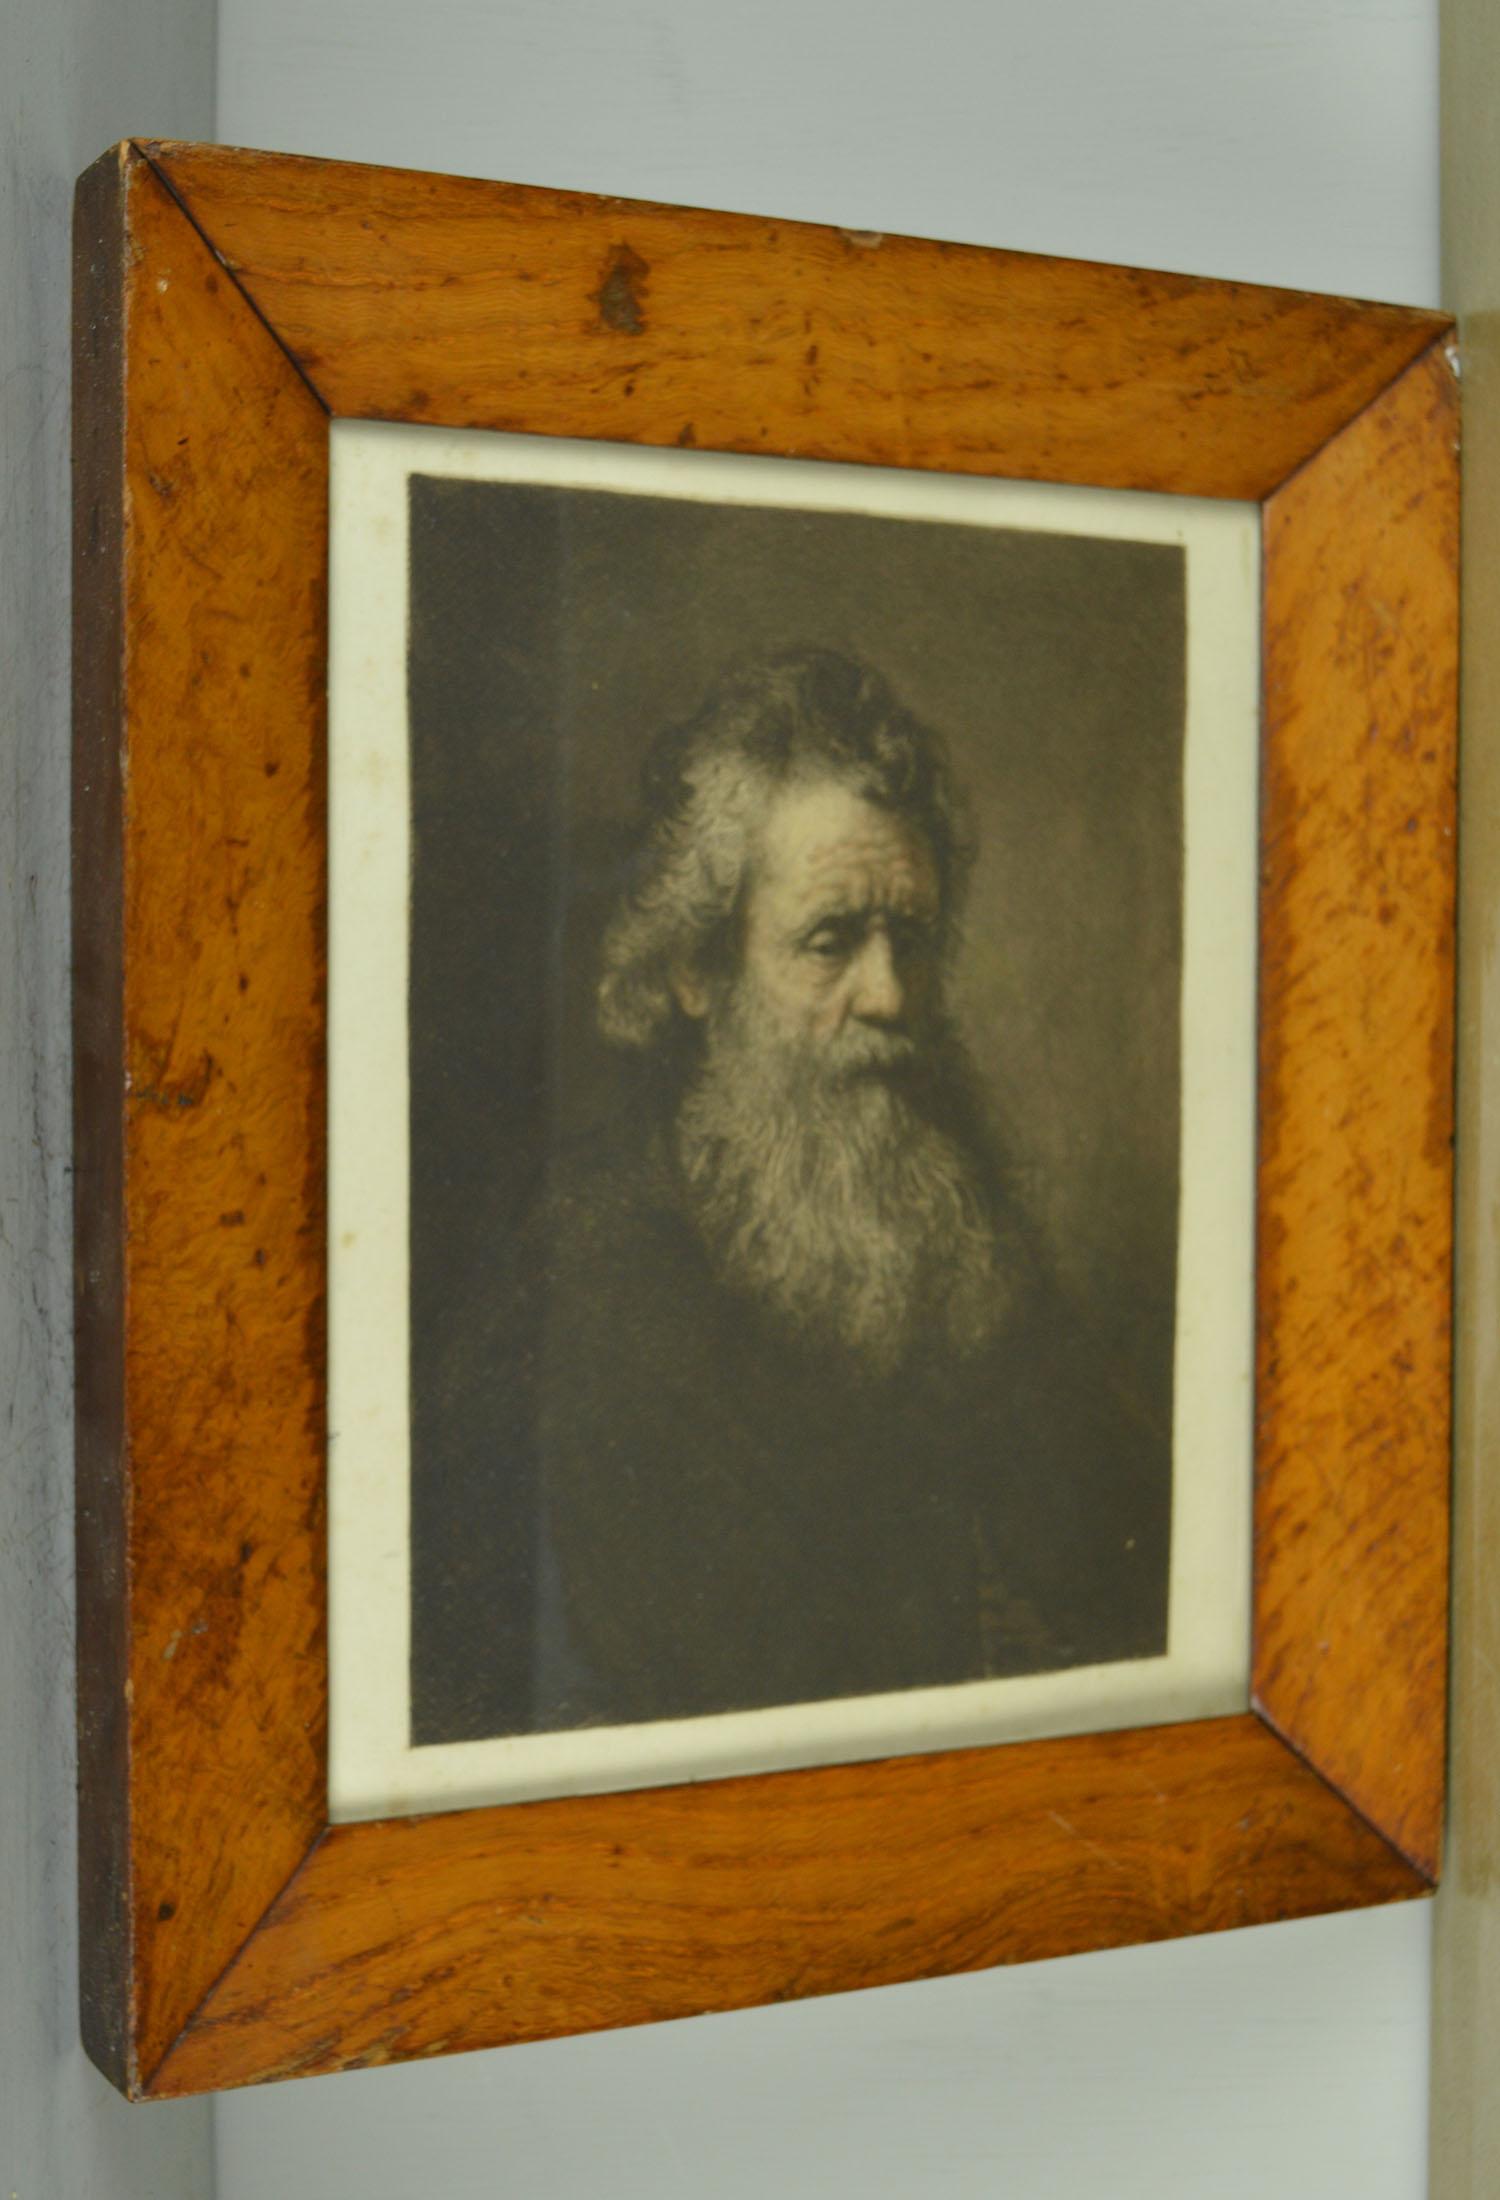 English Portrait of an Old Man, After Rembrandt, Etching, circa 1850